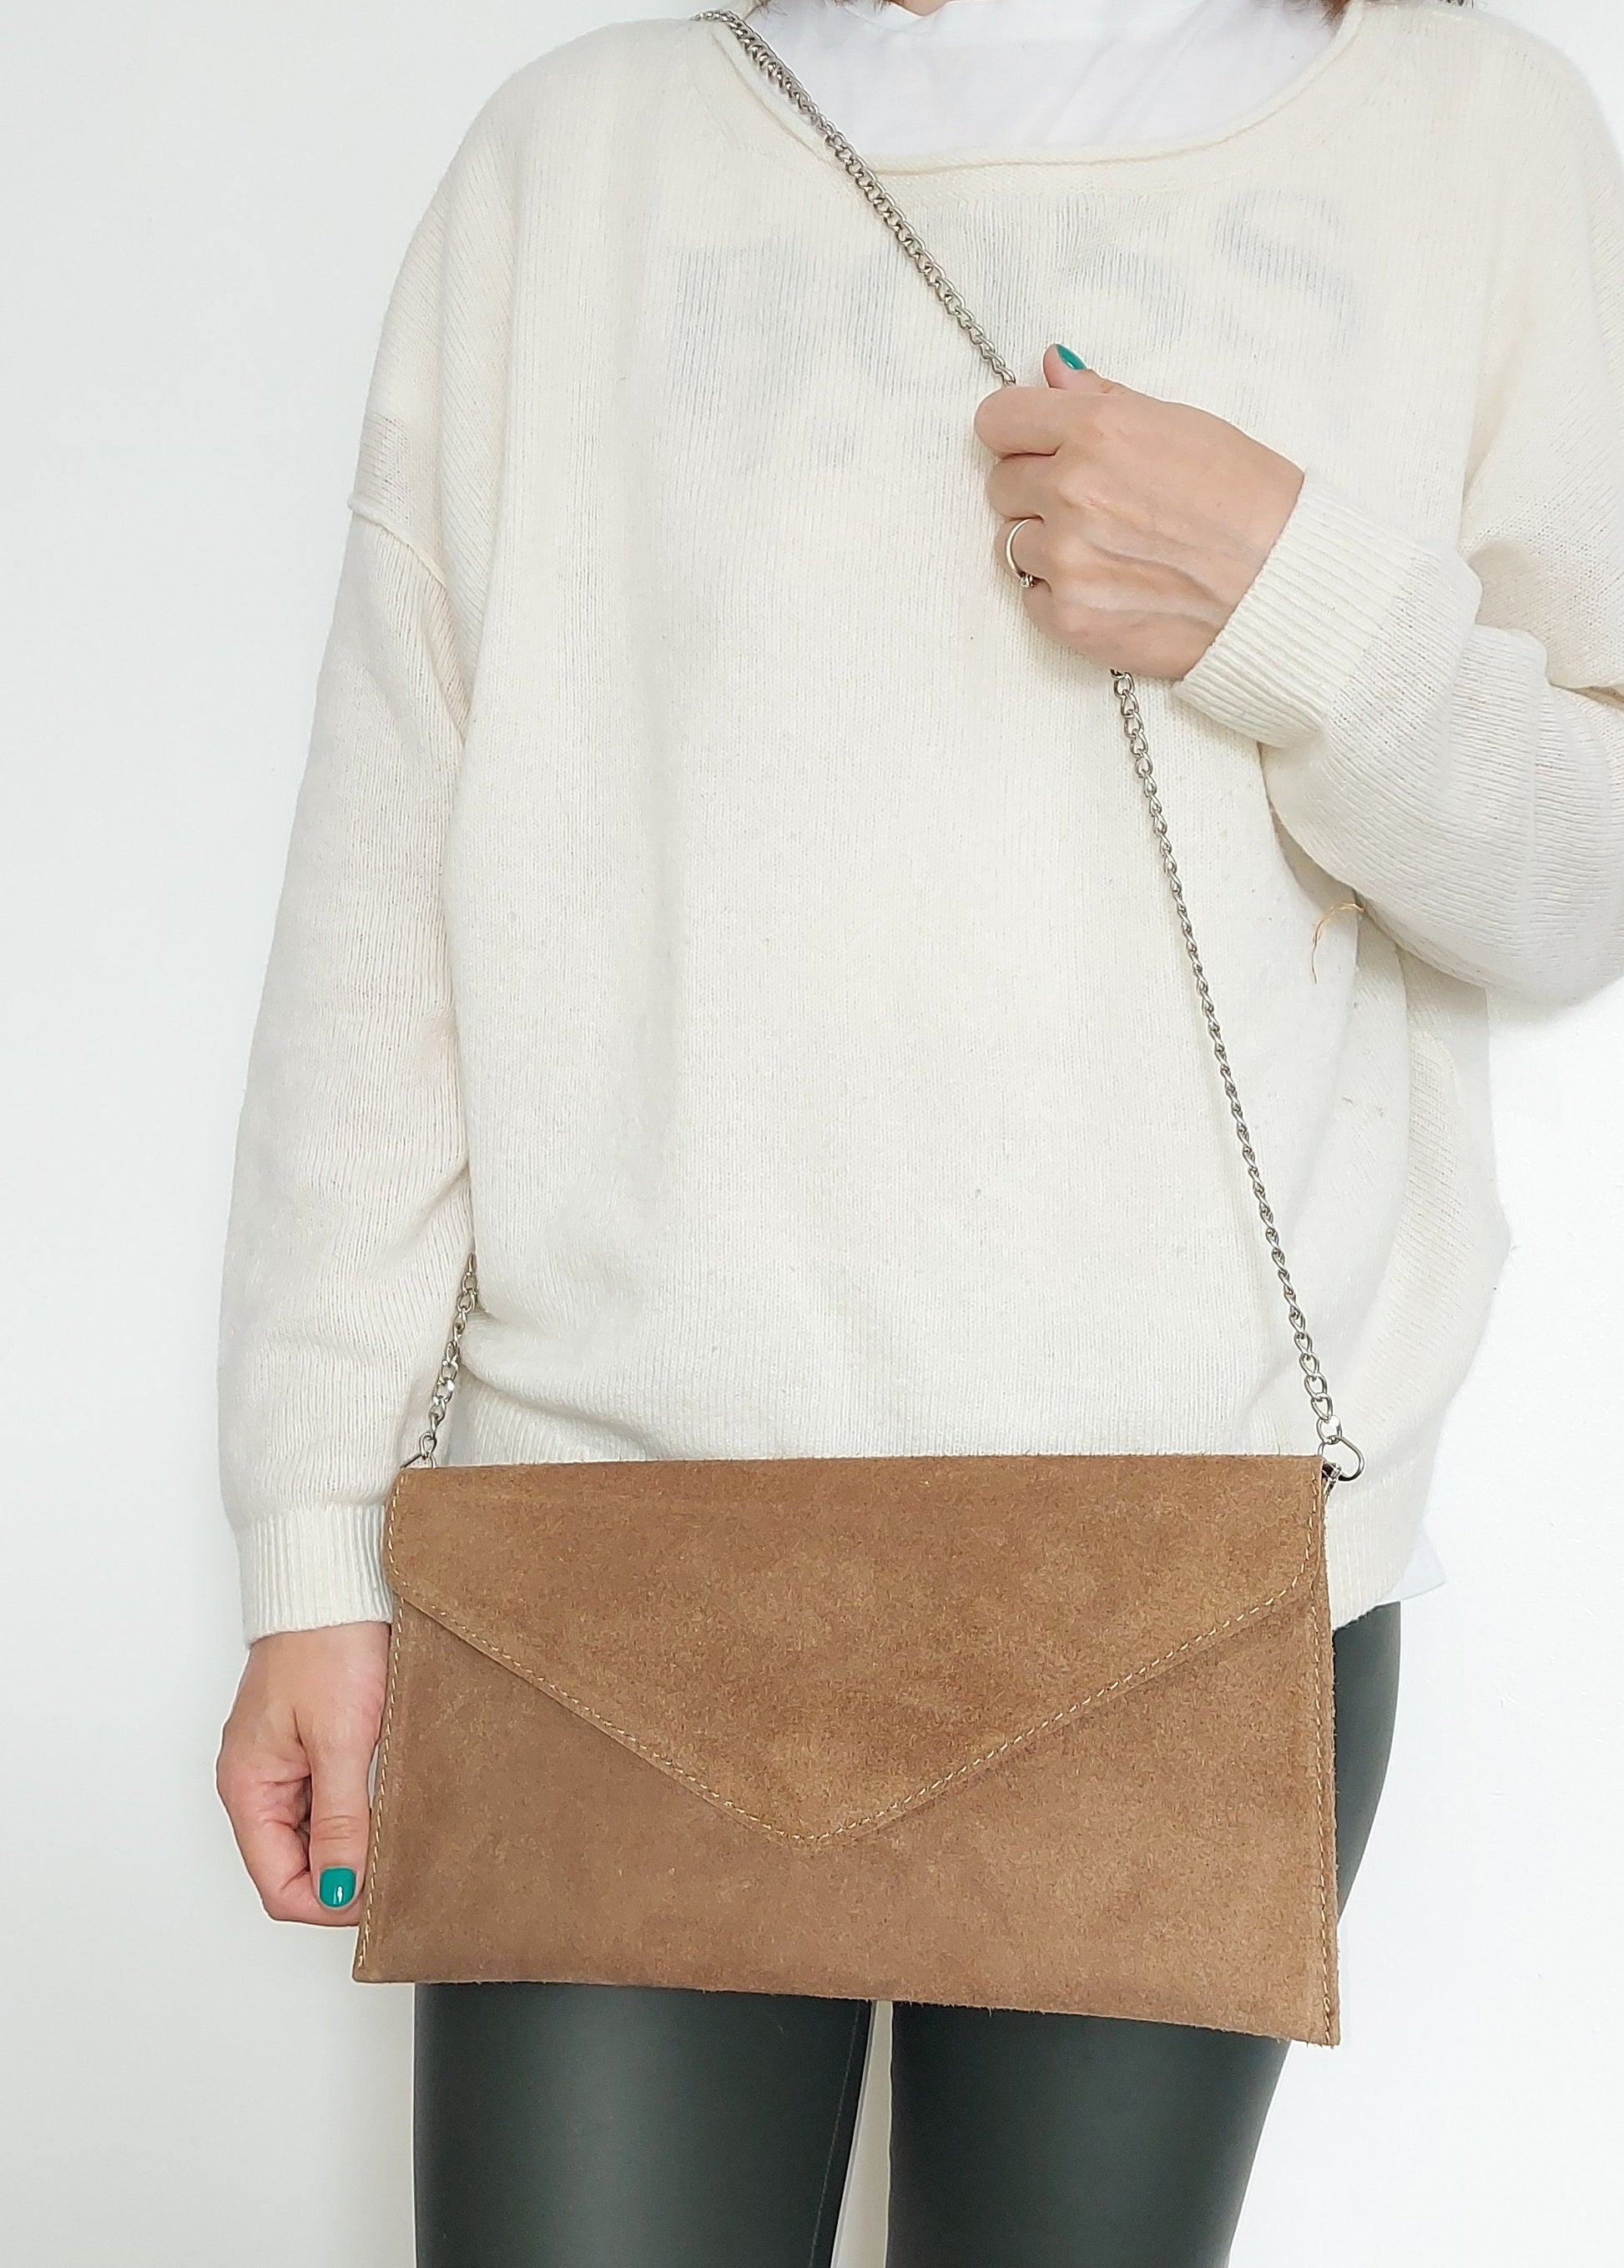 Taupe Suede envelope clutch bag with chain strap